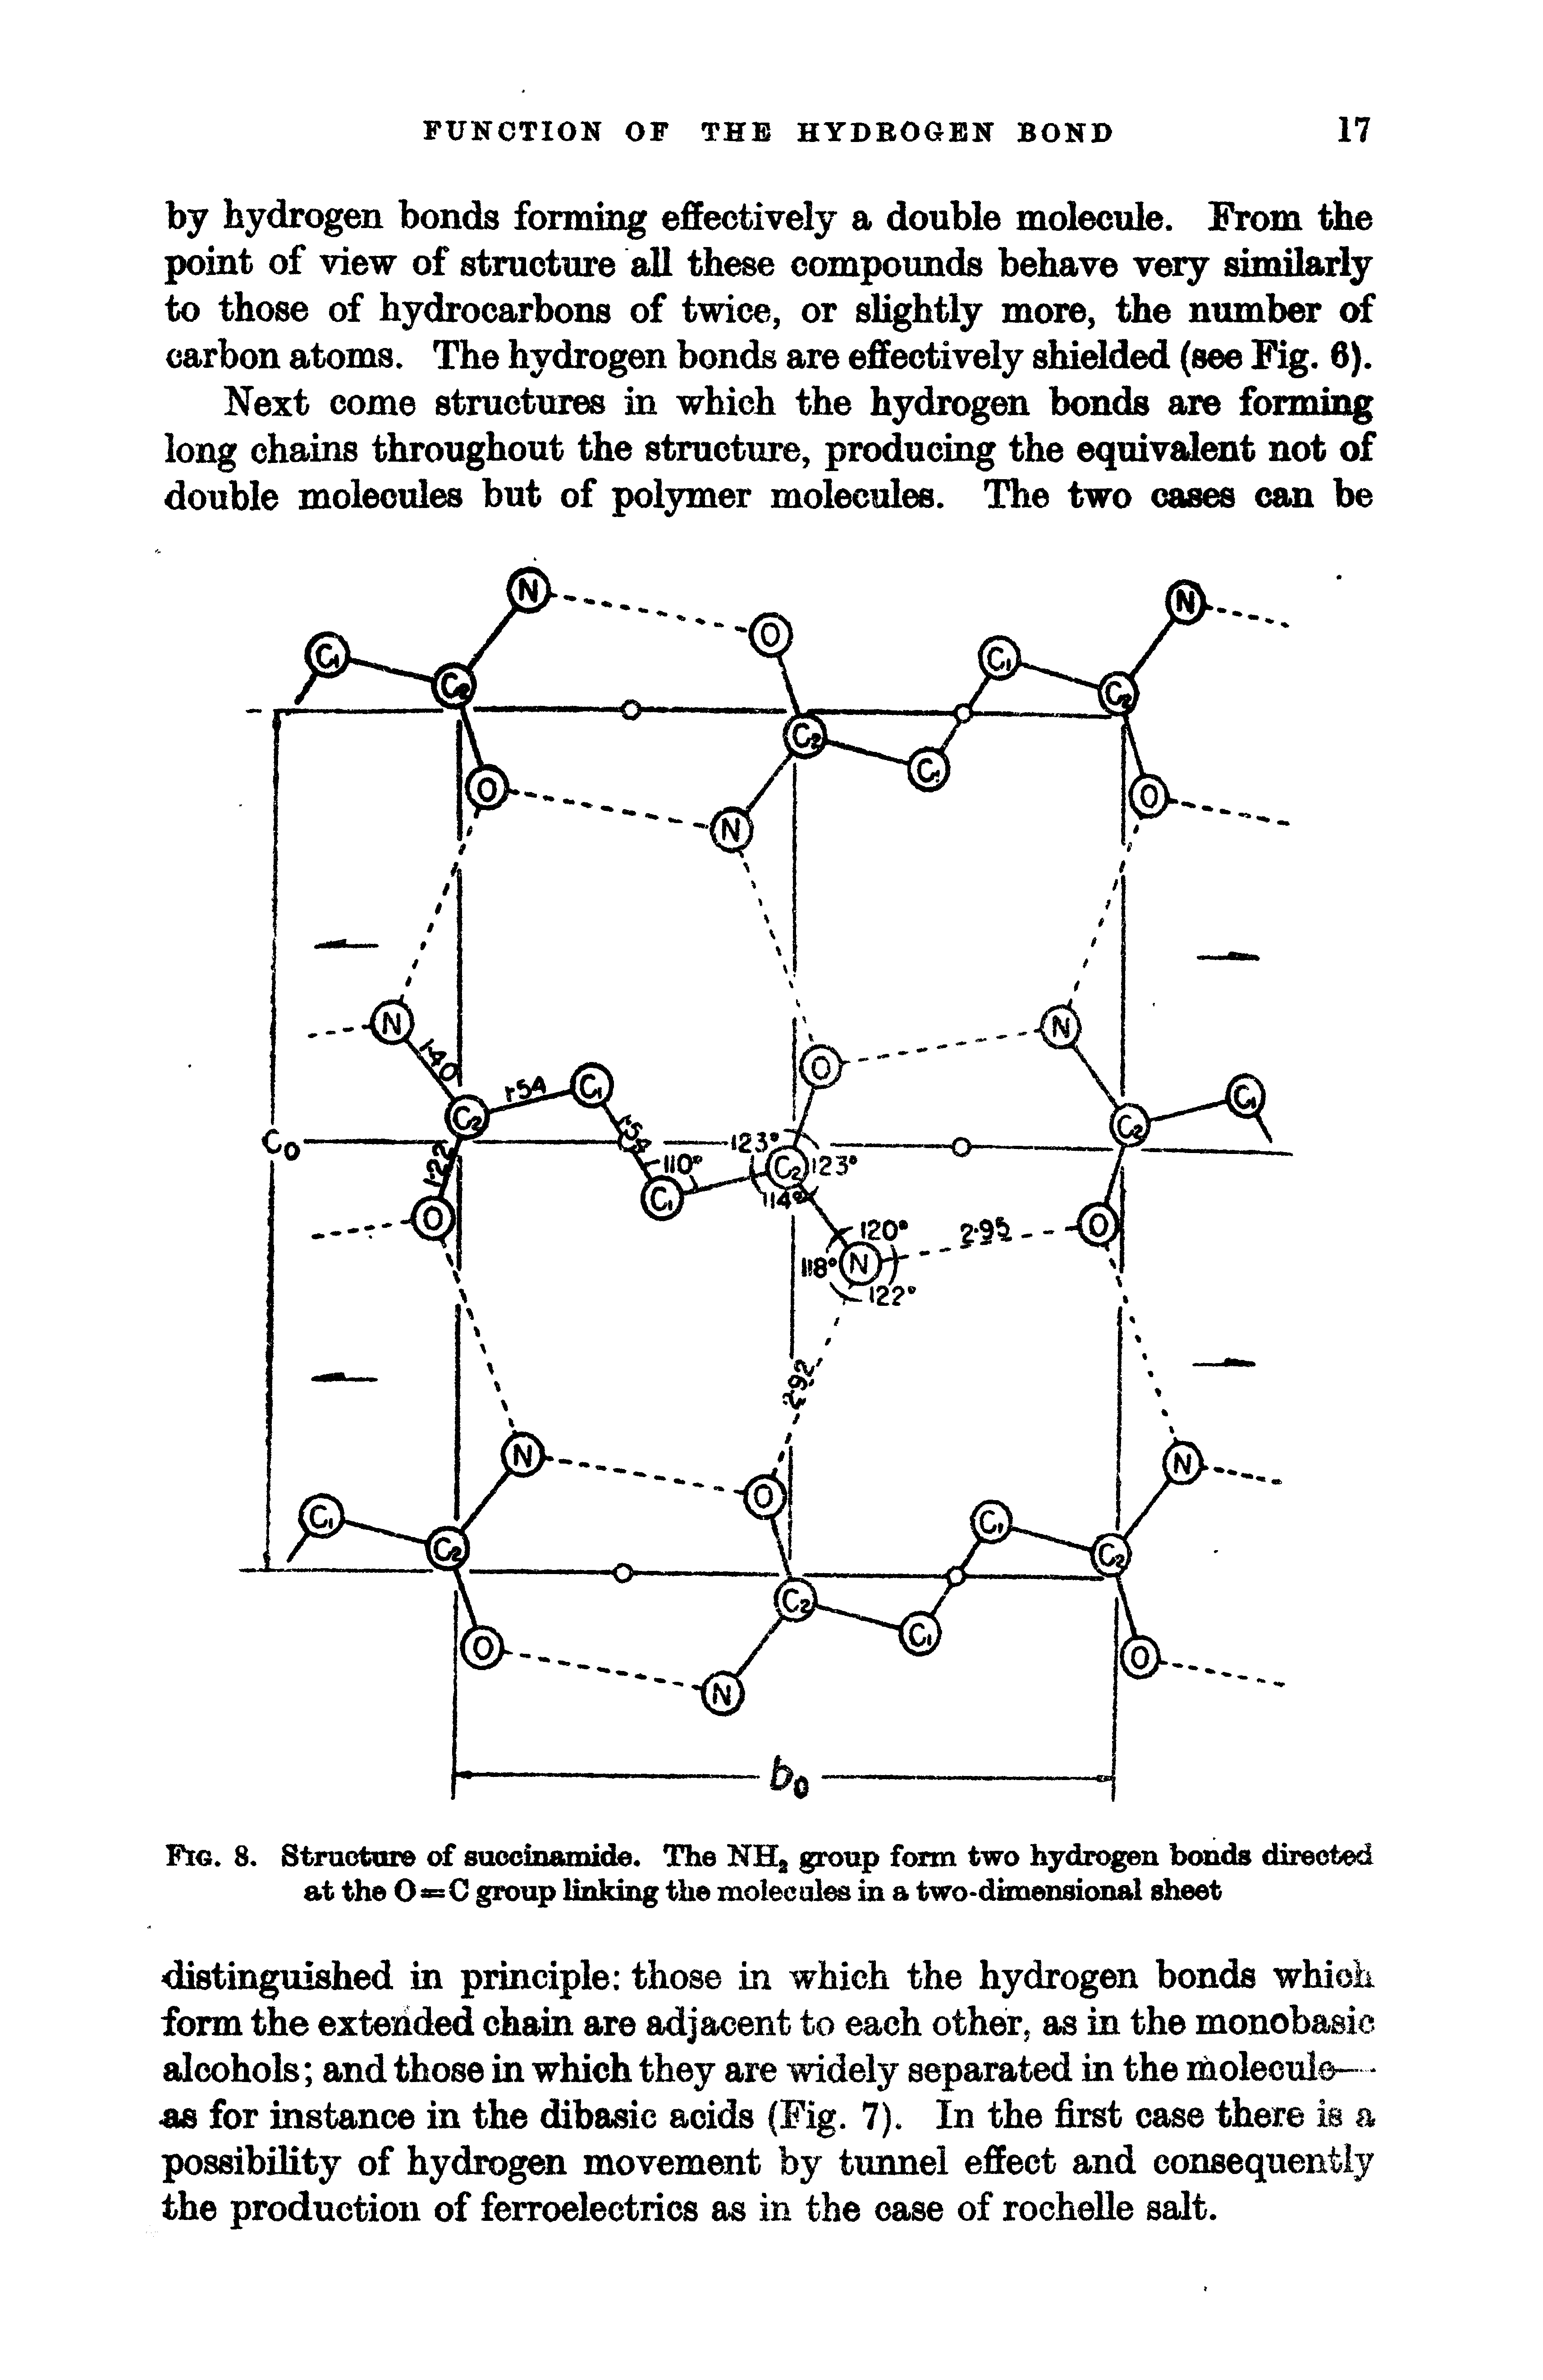 Fig. 8. Structure of succinamide. The NHa group form two hydrogen bonds directed at the 0 =C group linking the molecules in a two-dimensional sheet...